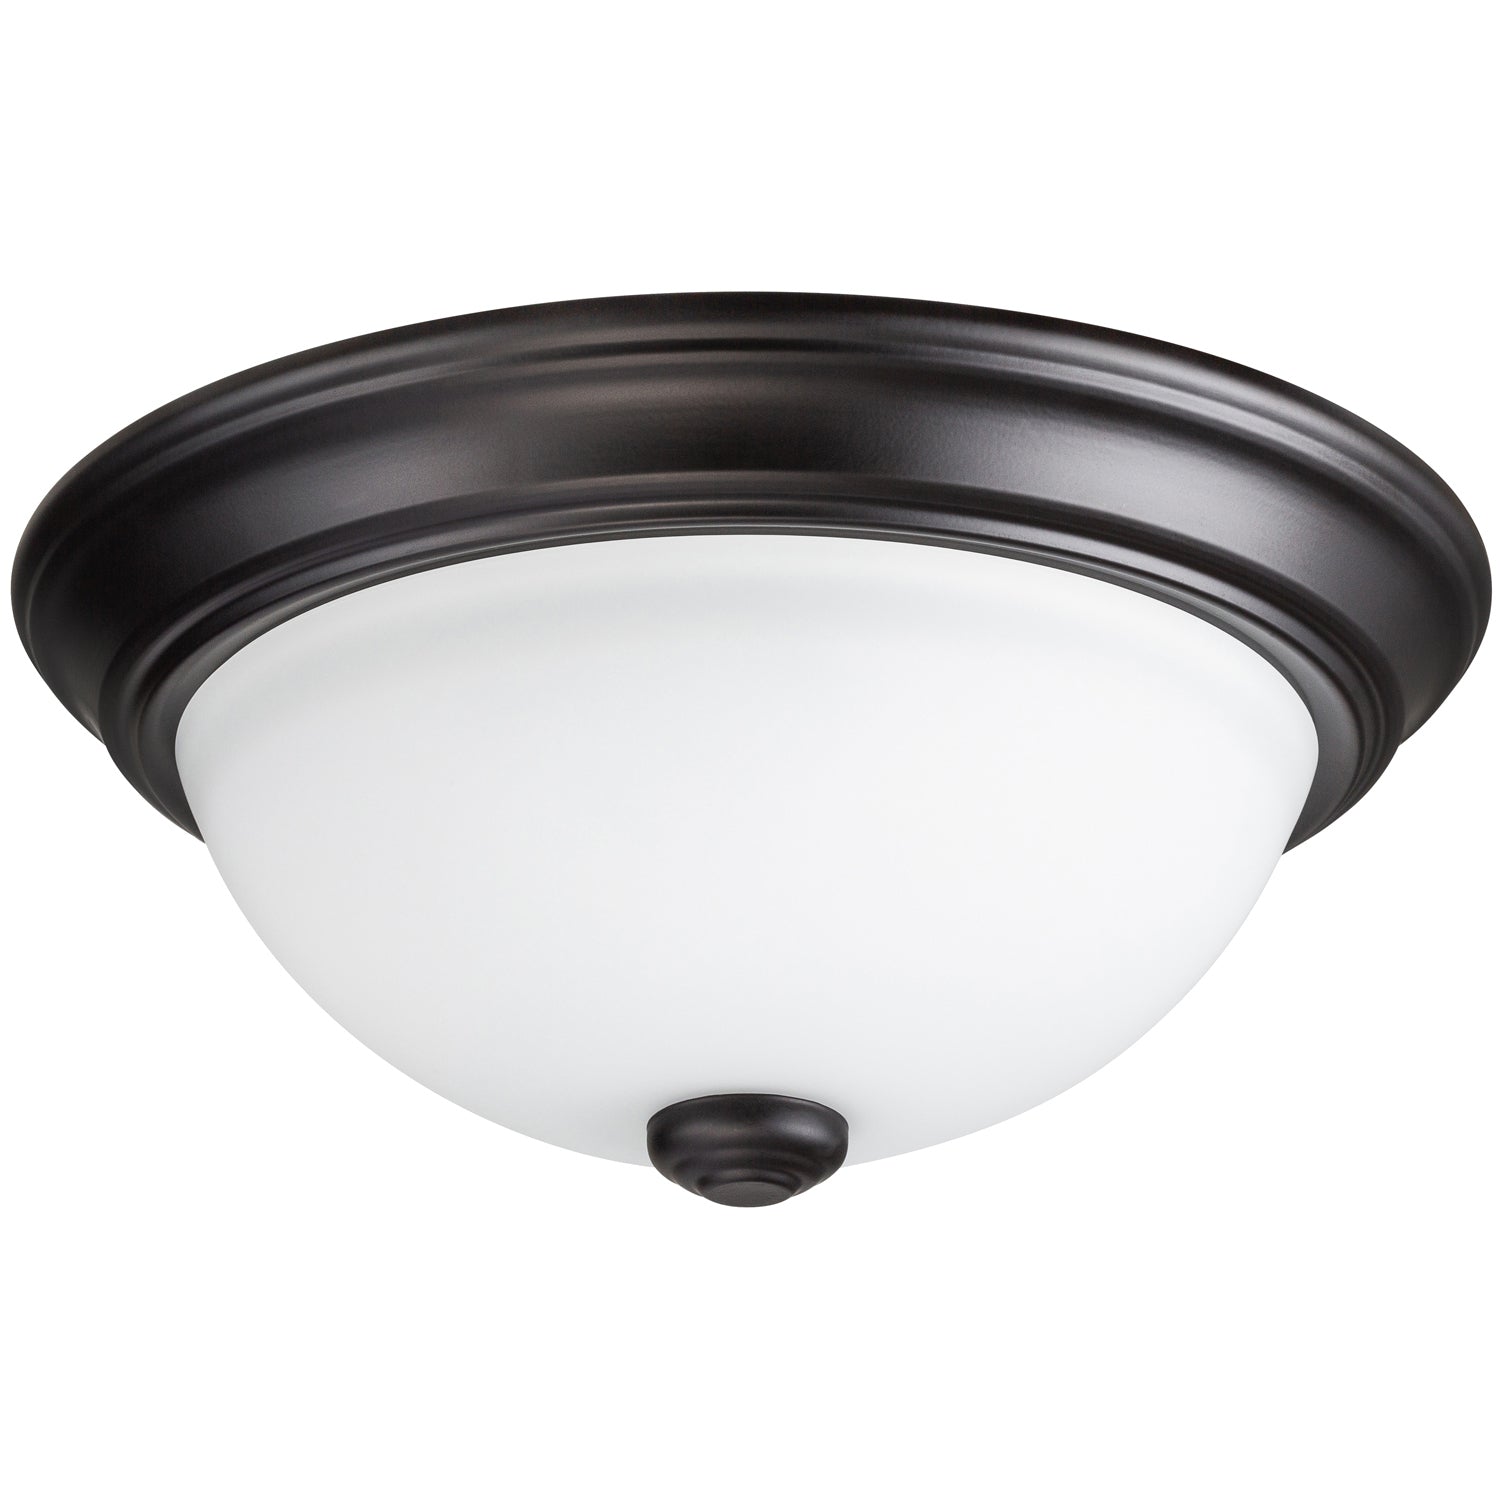 11 Inch Classic Flushmount Light, Frosted Glass, Bronze by Prominence Home